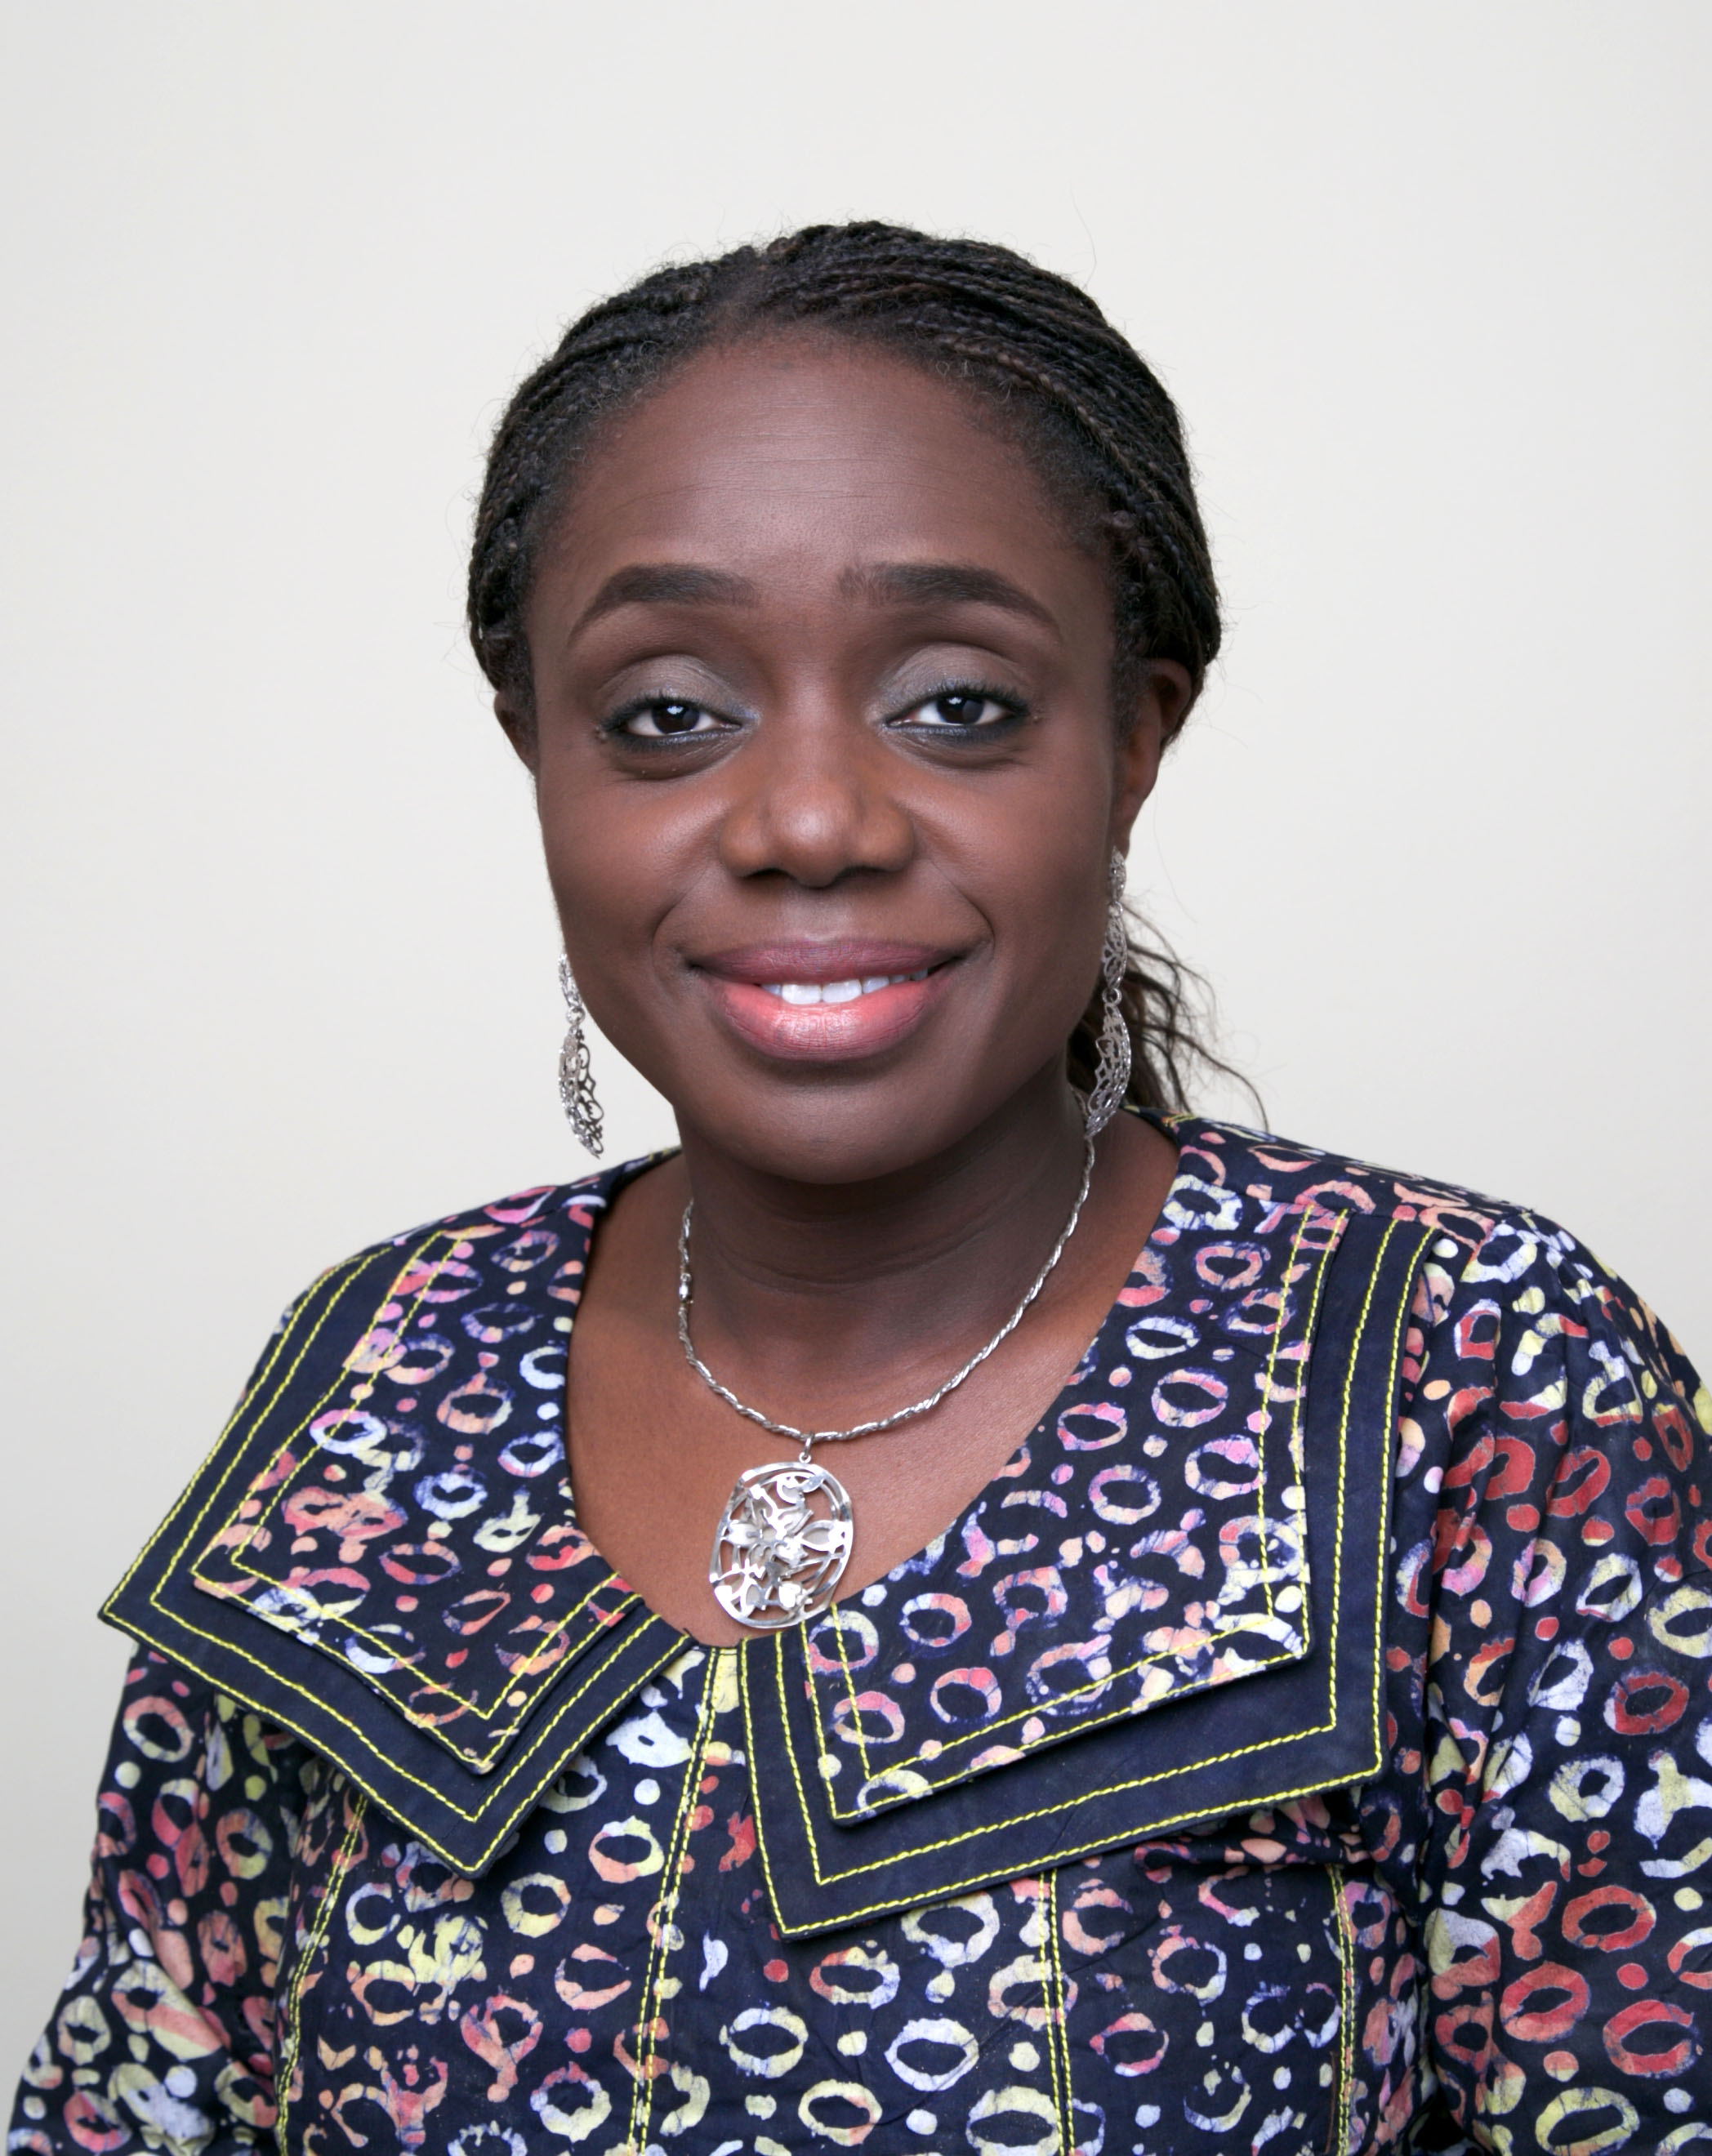 PDP Demands Adeosun’s Immediate Sack, Trial Over Certificate Forgery